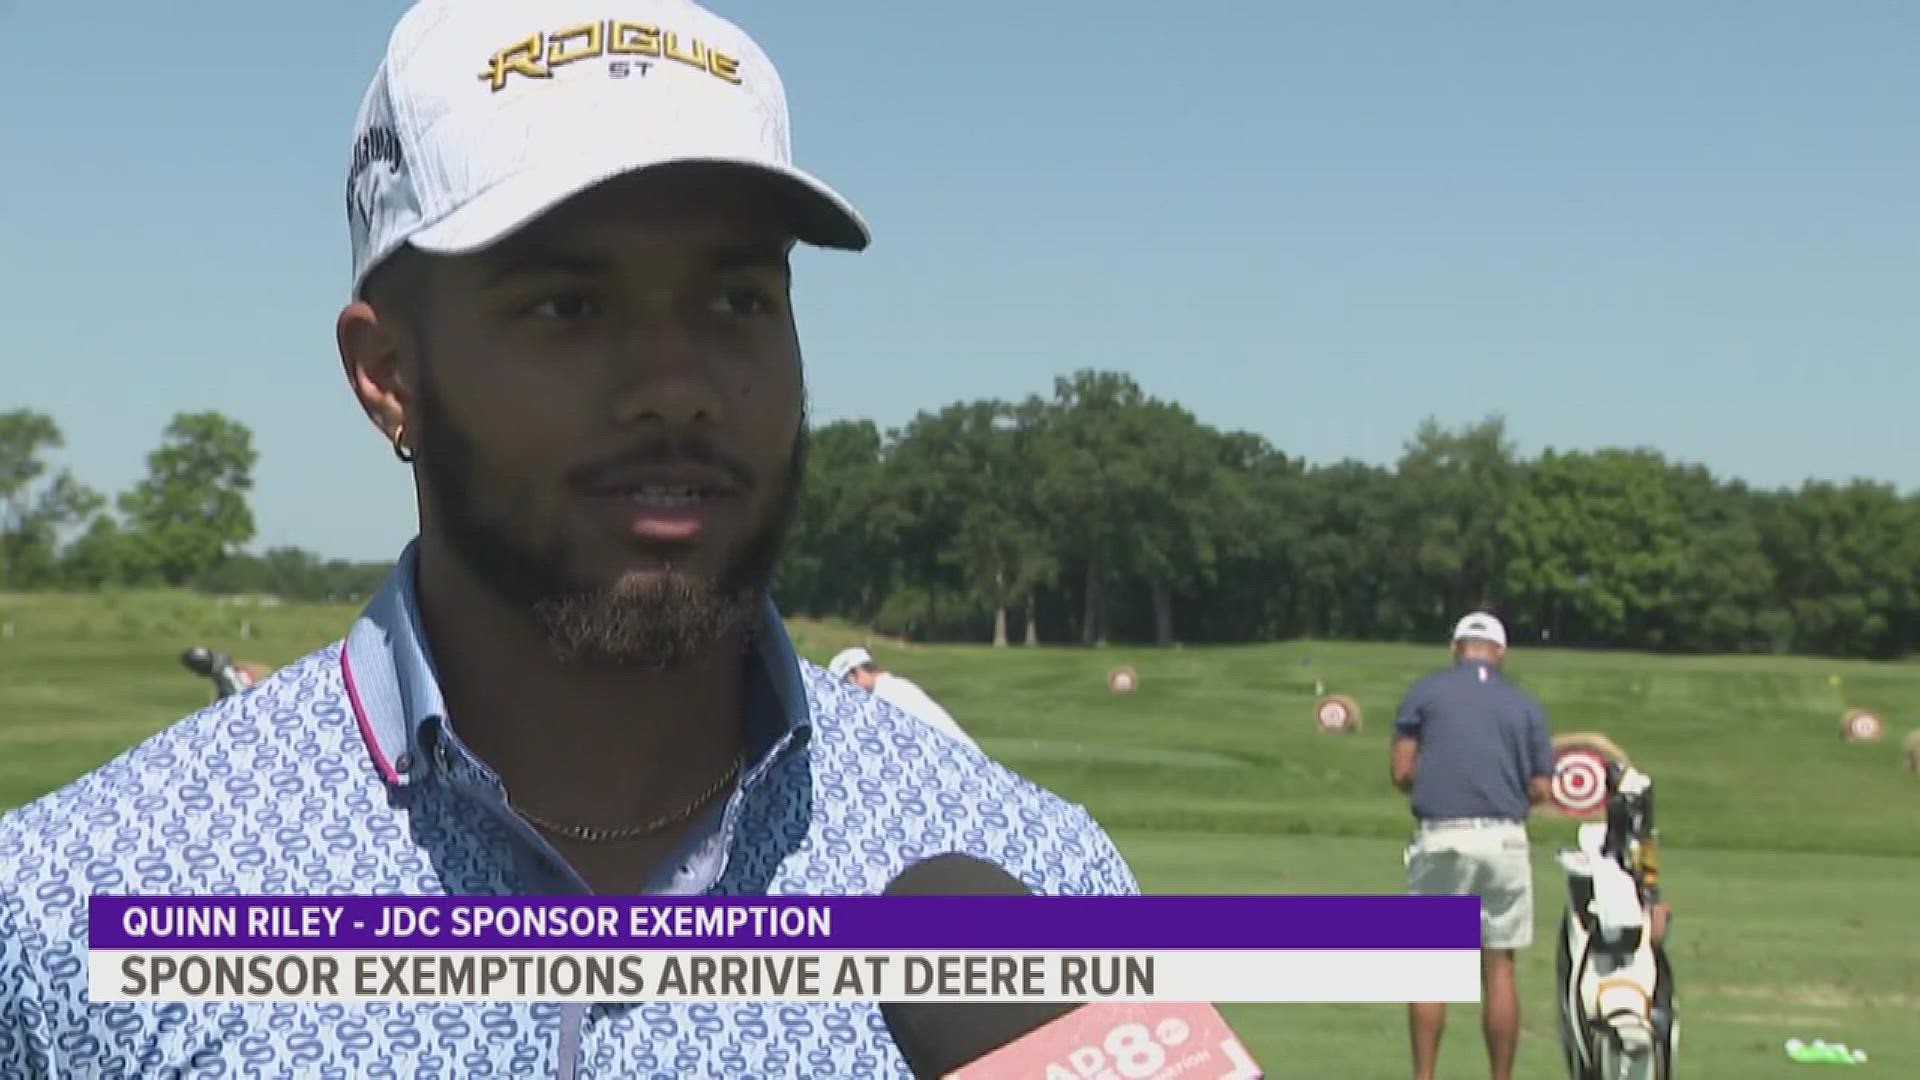 Some of the talent at this year's John Deere Classic are making their debuts, including an Illinois native.